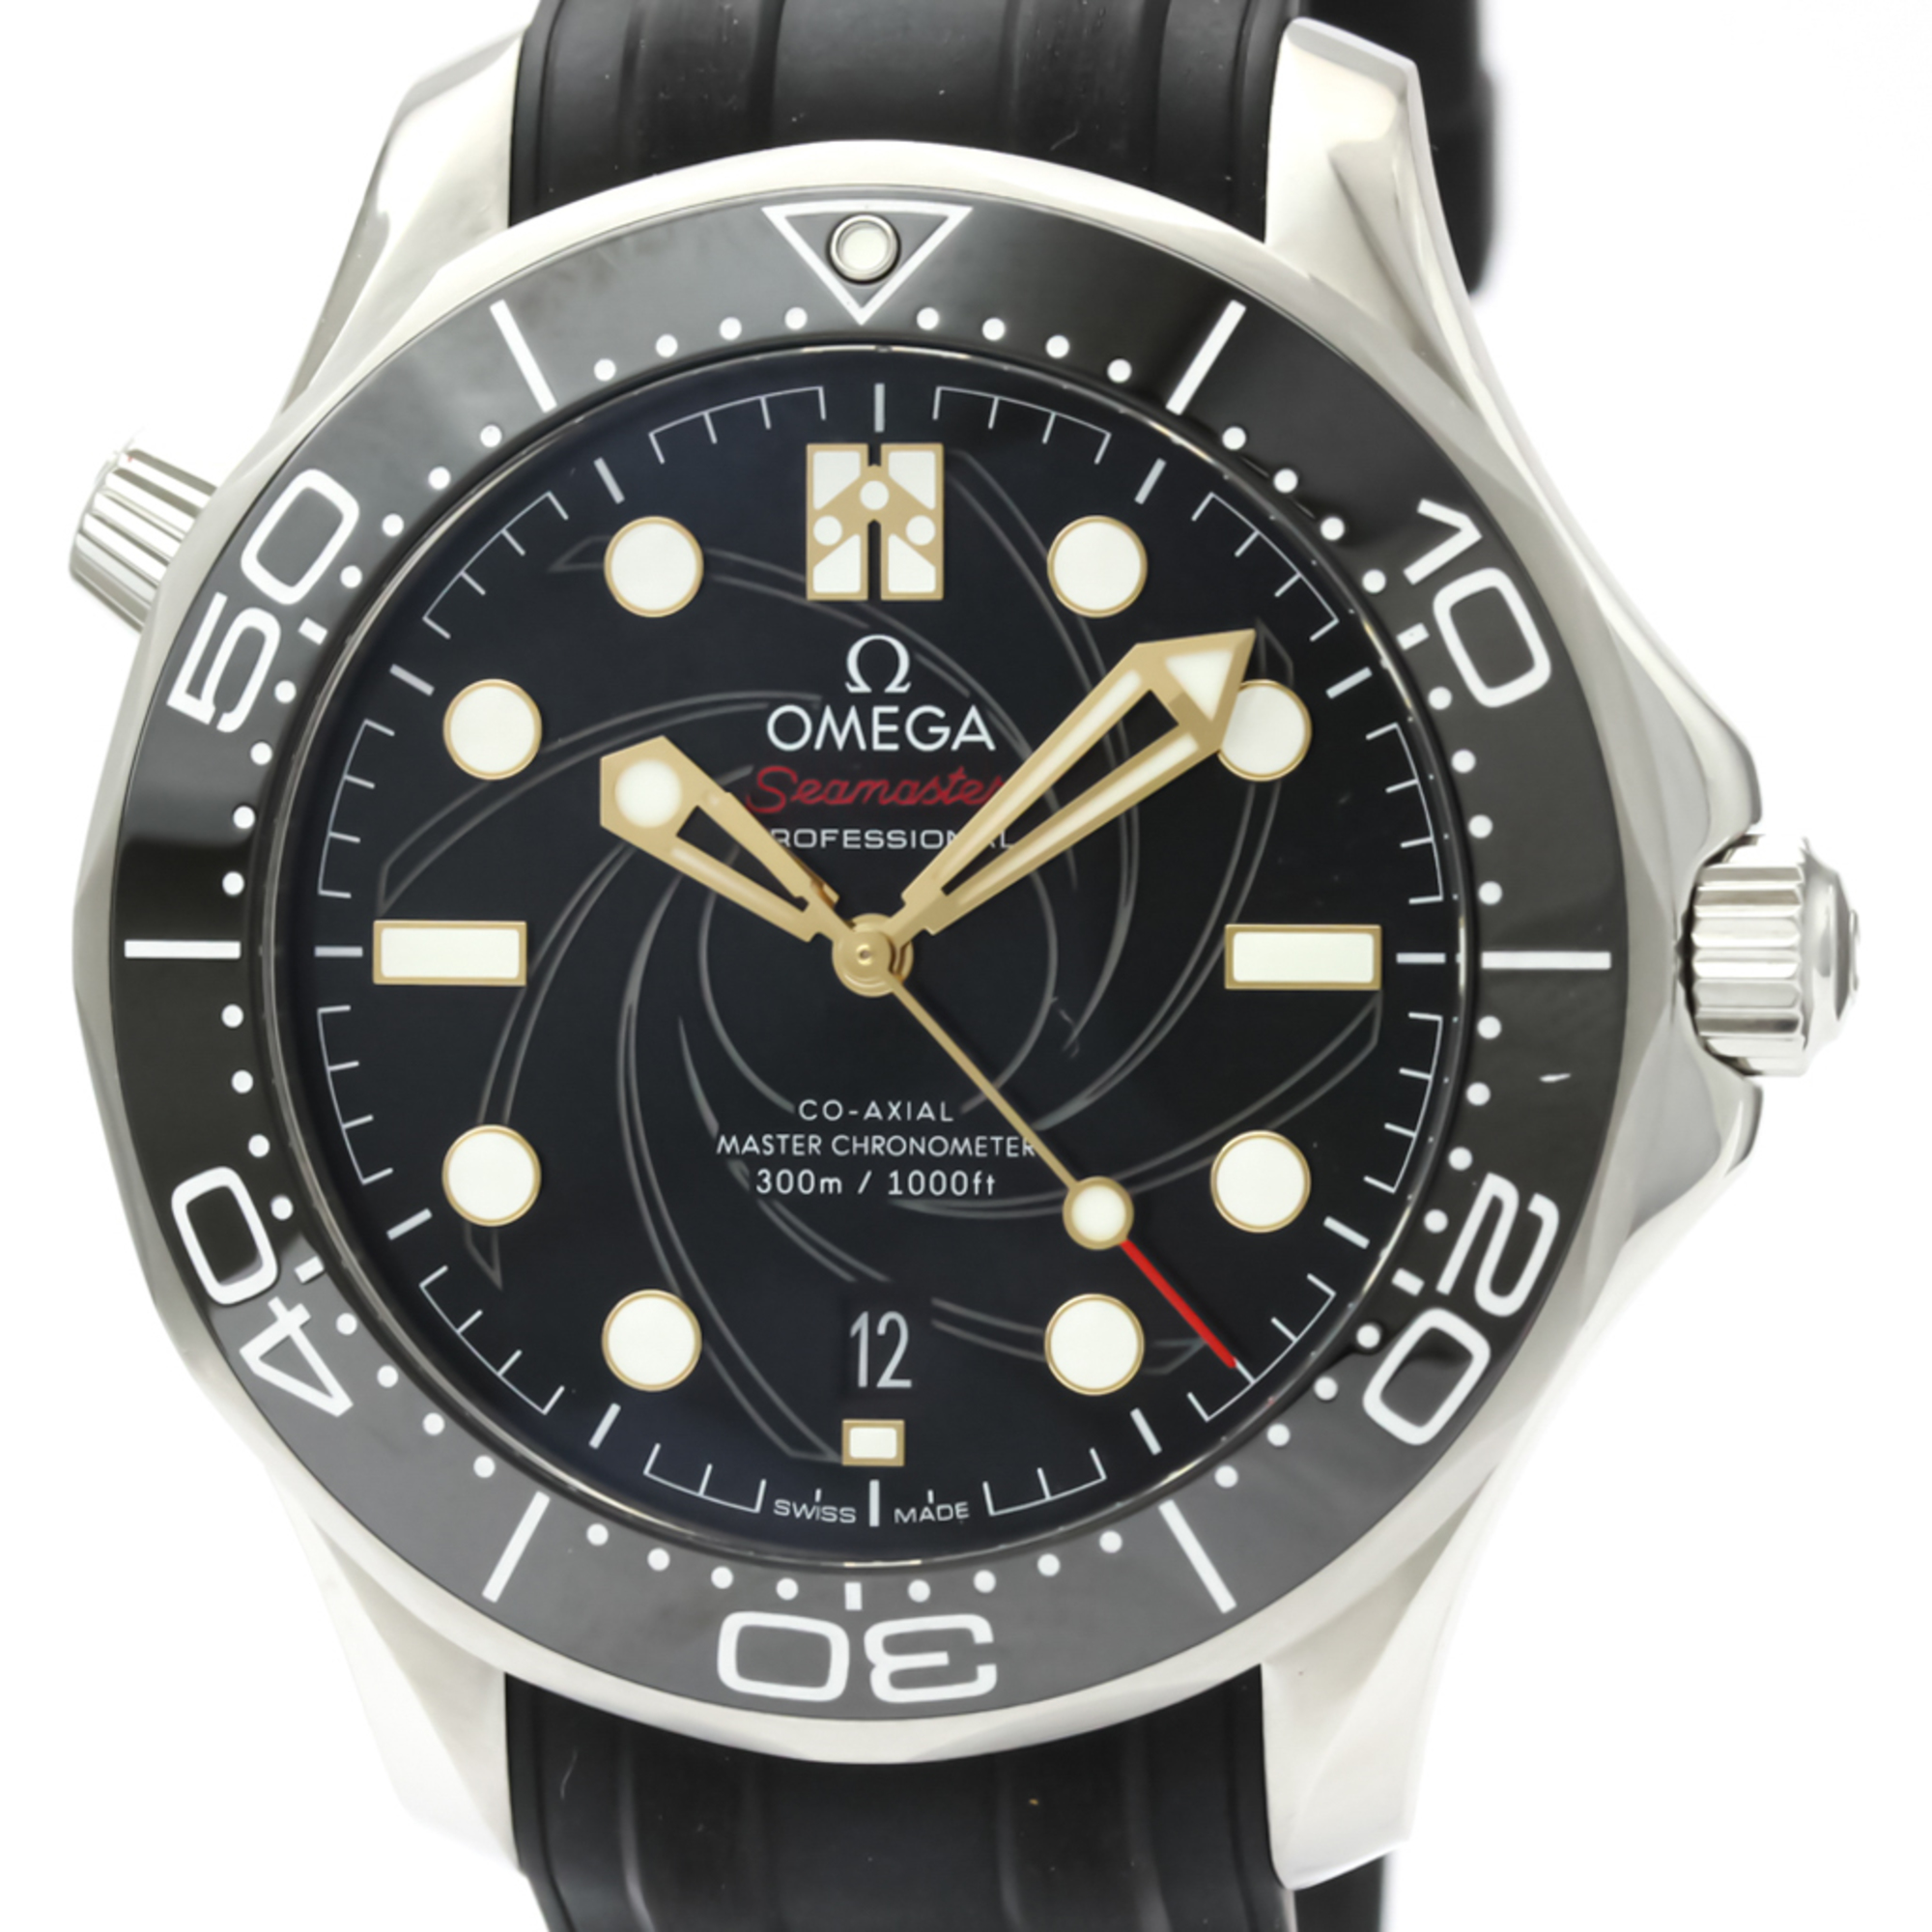 Omega Seamaster Automatic Stainless Steel Men's Sports Watch 210.22.42.20.01.004